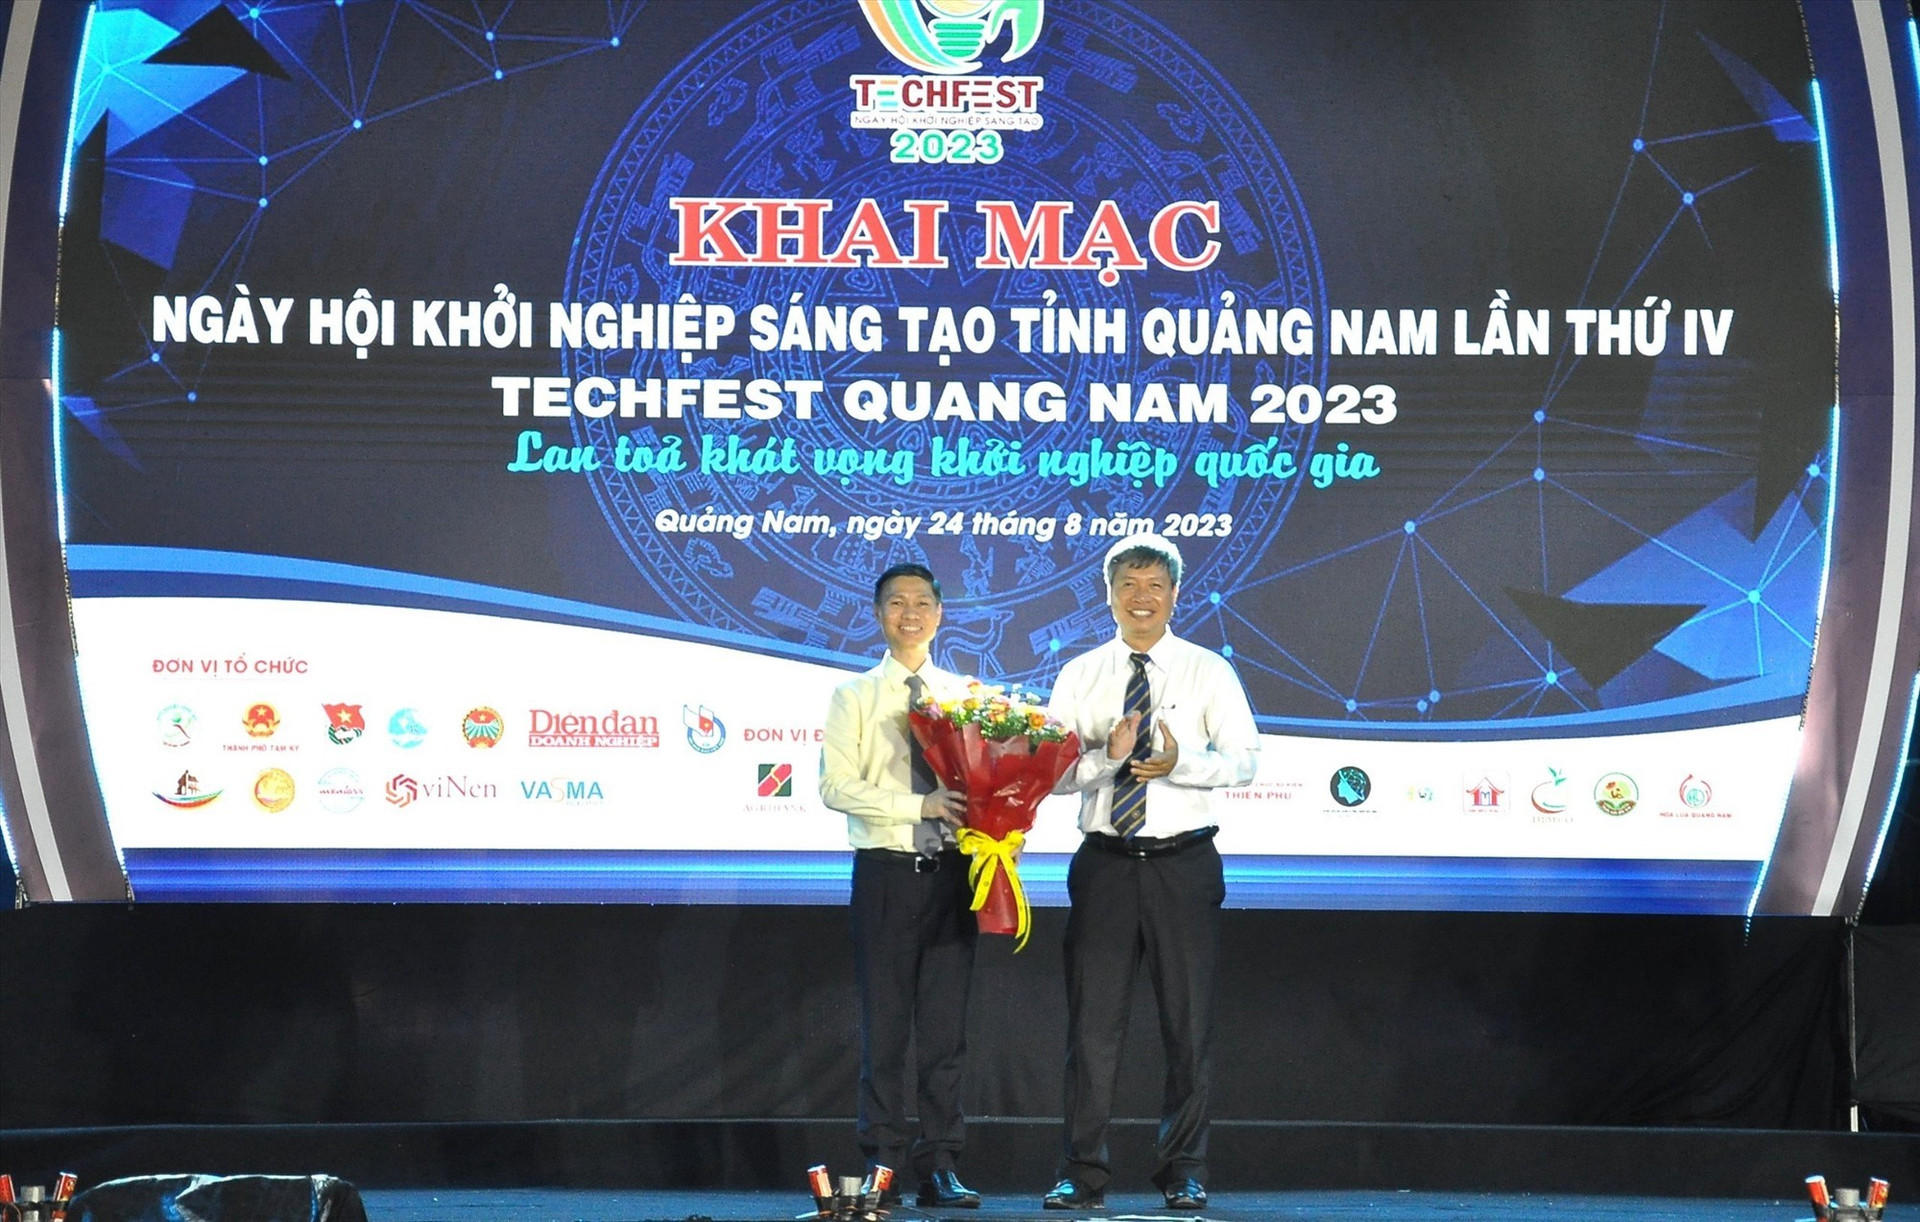 Closing ceremony of TechFest Quang Nam 2023